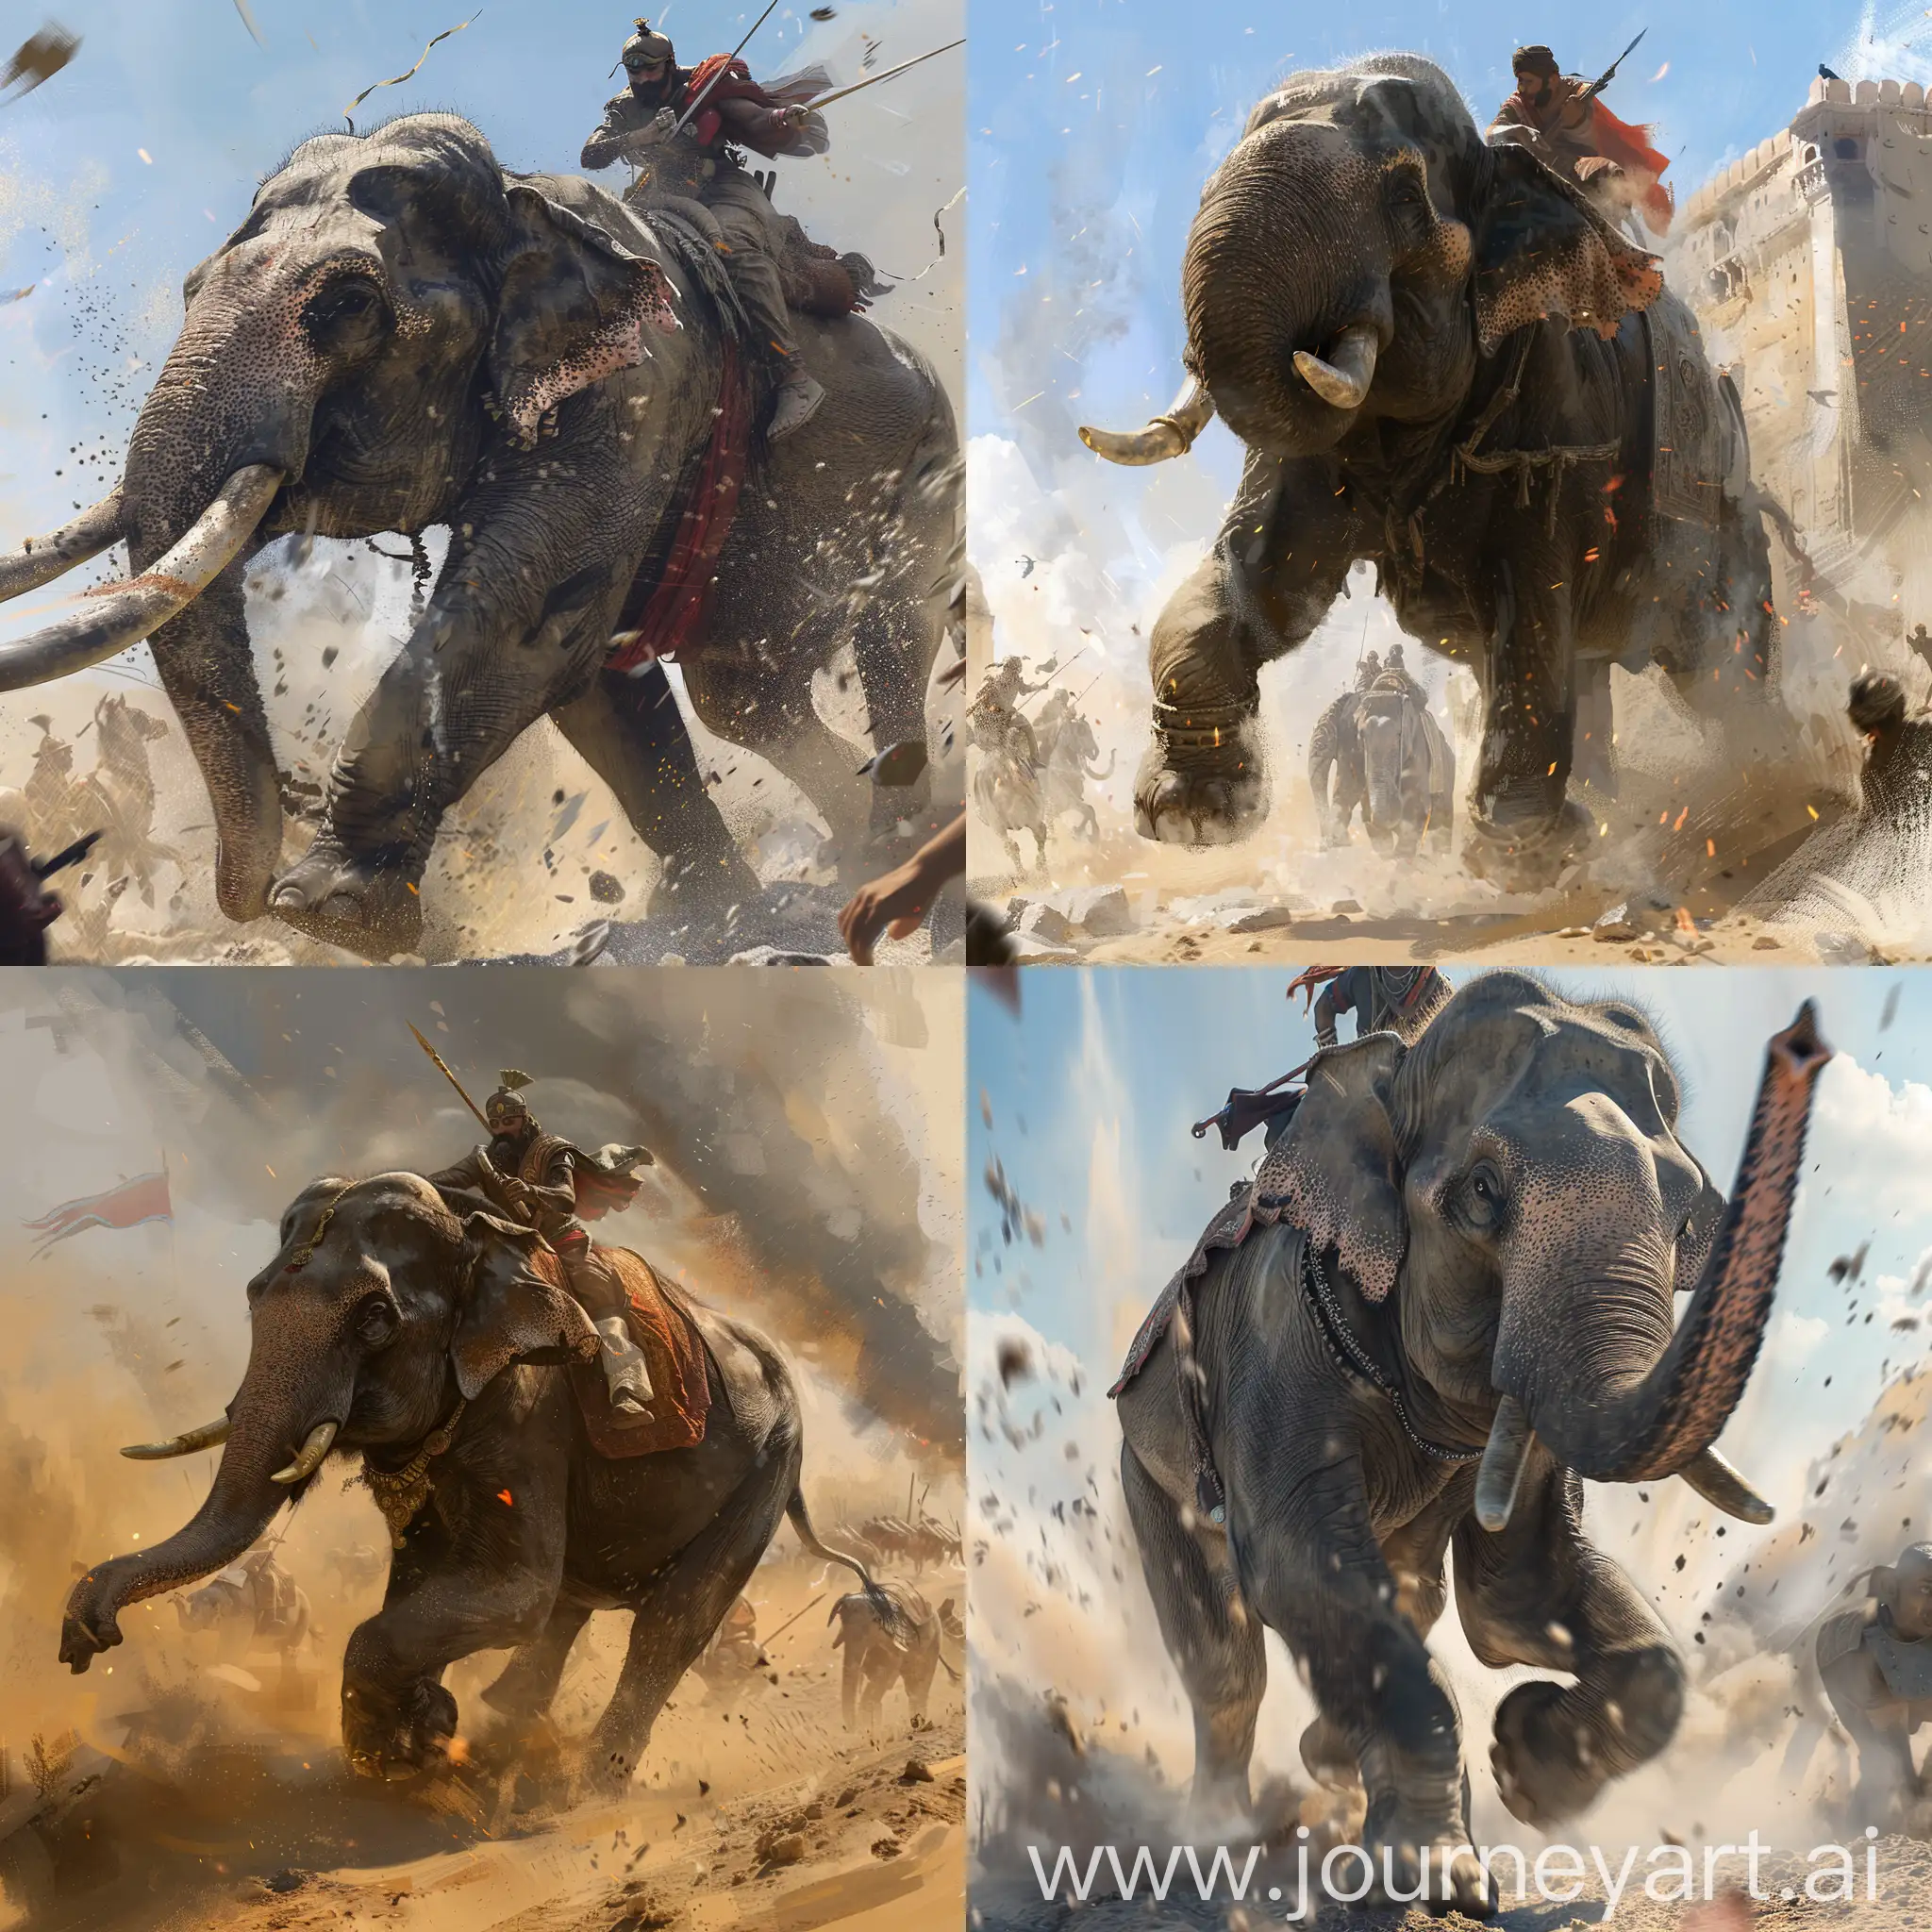 The year is 1498 CE. A battle is going on between the rajput forces and sultanate. Imagine a rajput war elephant in an attacking stance running towards someone. A person is sitting on top of the elephant.